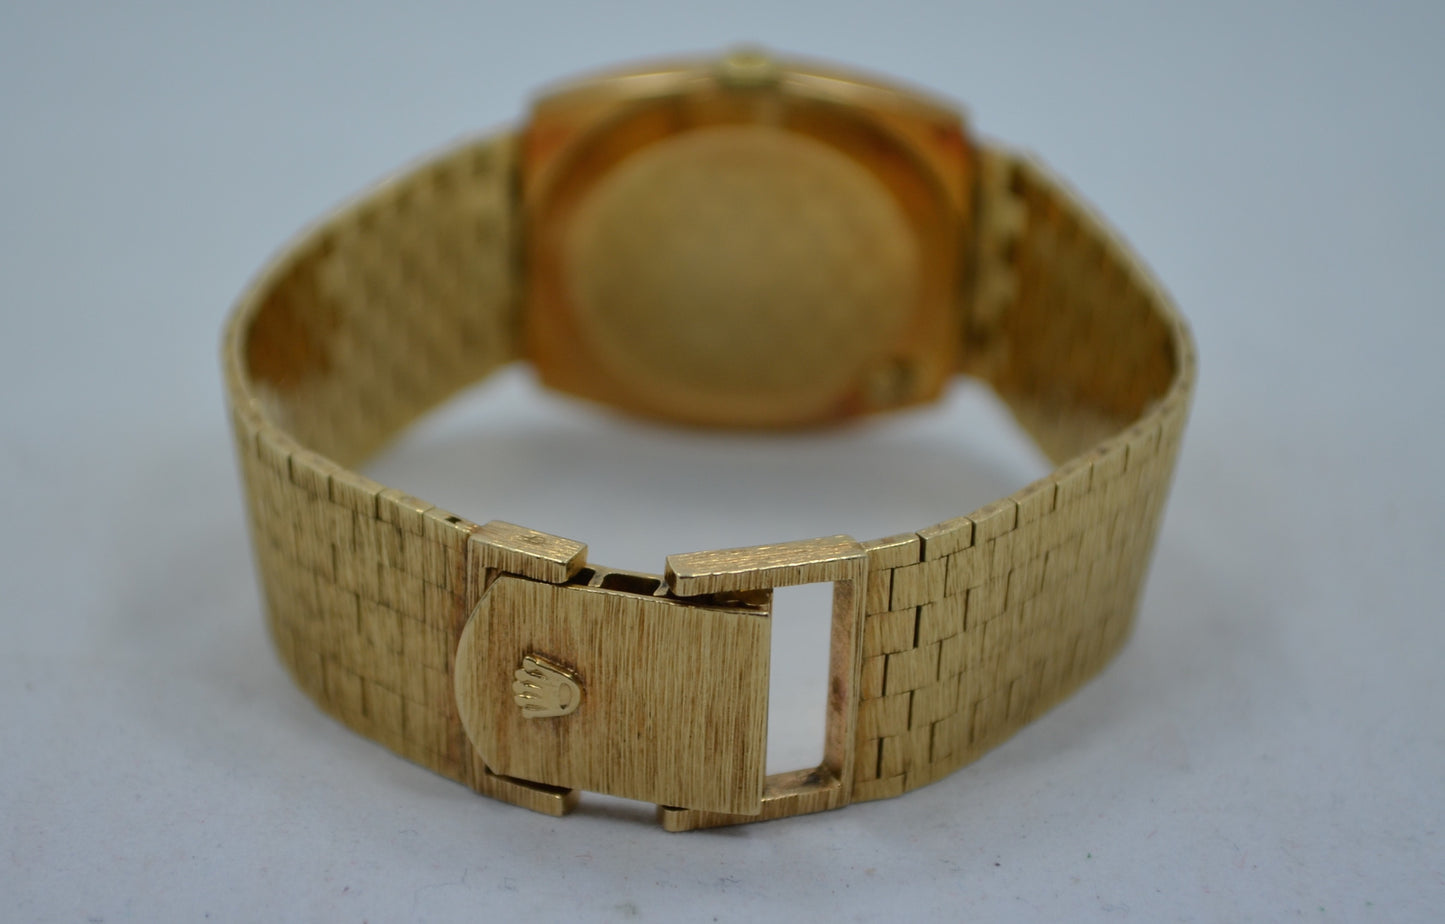 Vintage Rolex 14K Yellow Gold Brick Square Manual Wind 604 Wristwatch 1970's - Hashtag Watch Company